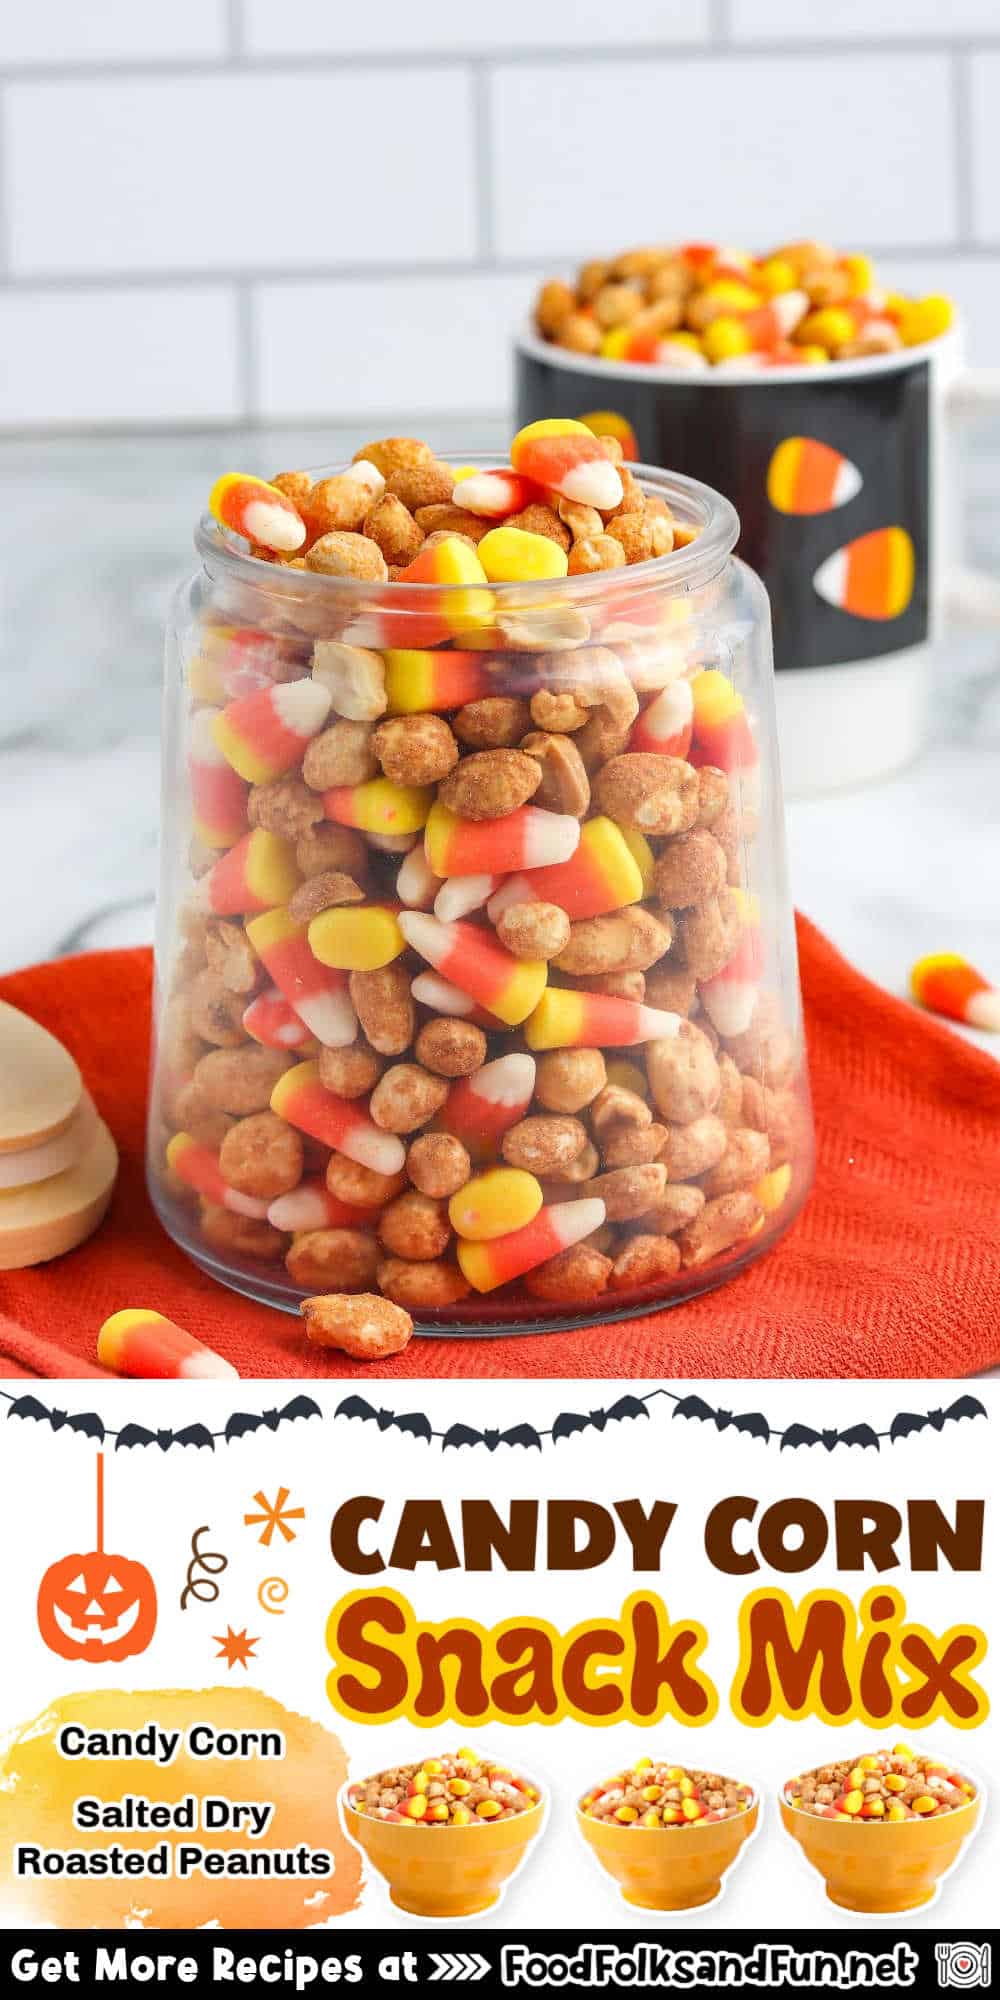 As if candy corn wasn’t addicting enough, candy corn and peanuts are the perfect combination of salty and sweet that just makes it irresistible. Plus, like any snack mix, it’s simple to make!
 via @foodfolksandfun